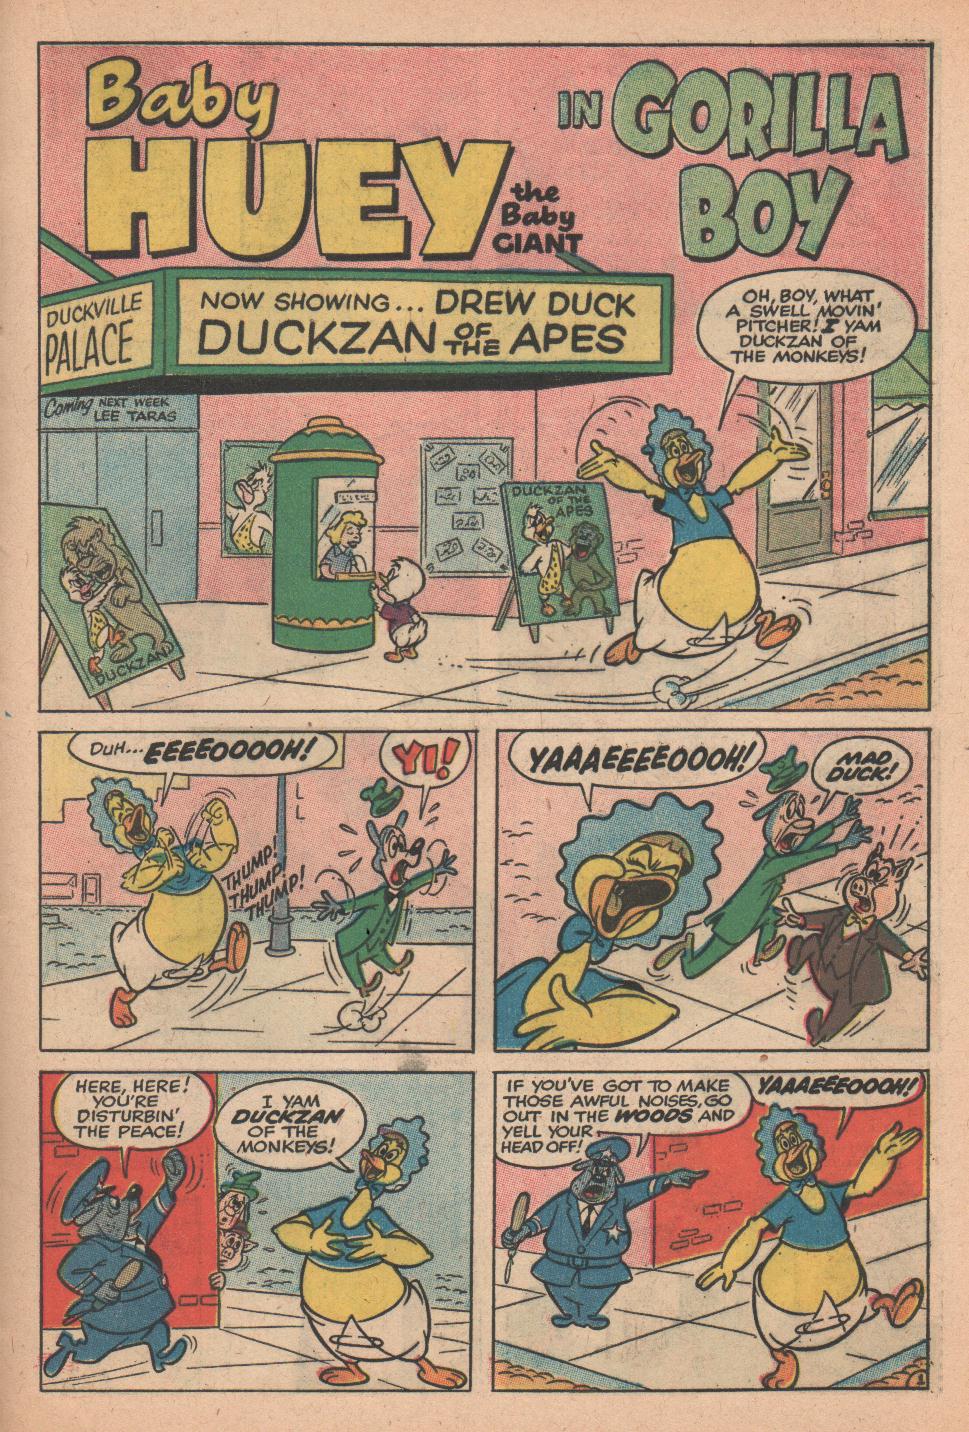 Read online Baby Huey, the Baby Giant comic -  Issue #19 - 21